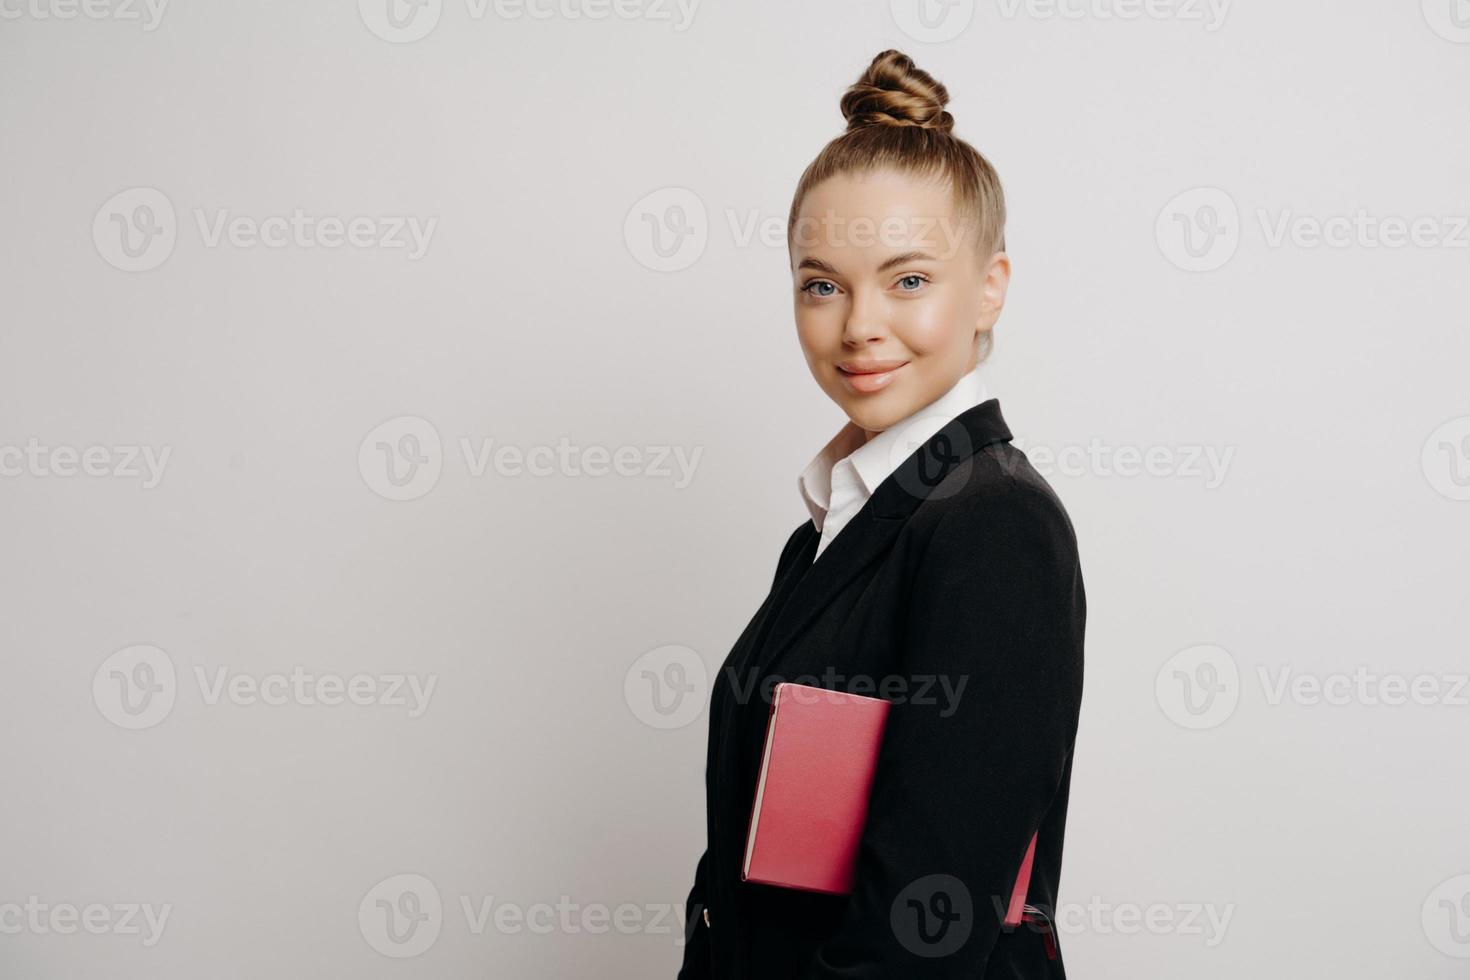 Bussiness woman in dark suit with confident look photo